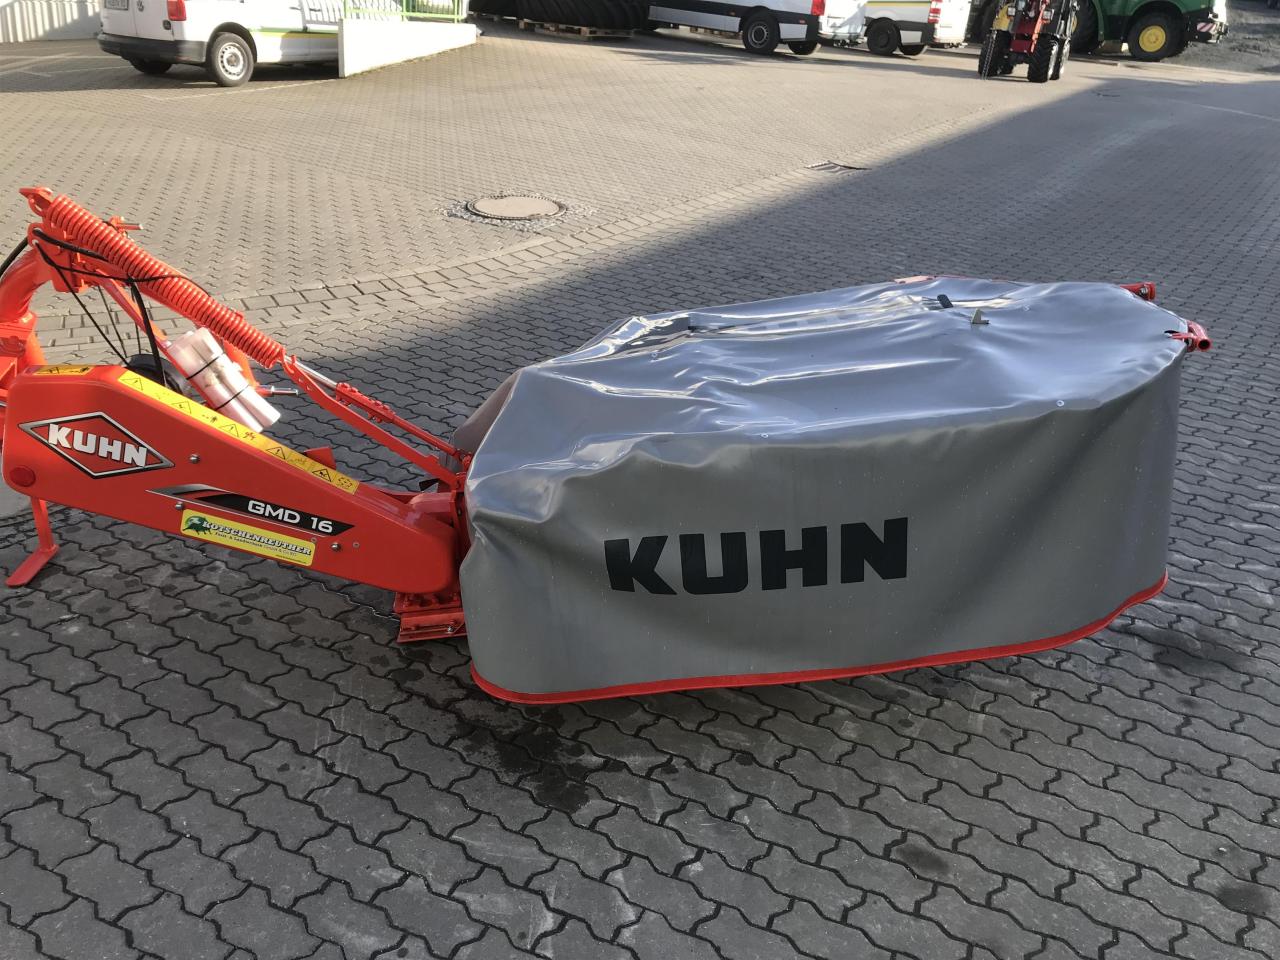 Kuhn GMD 16 Front